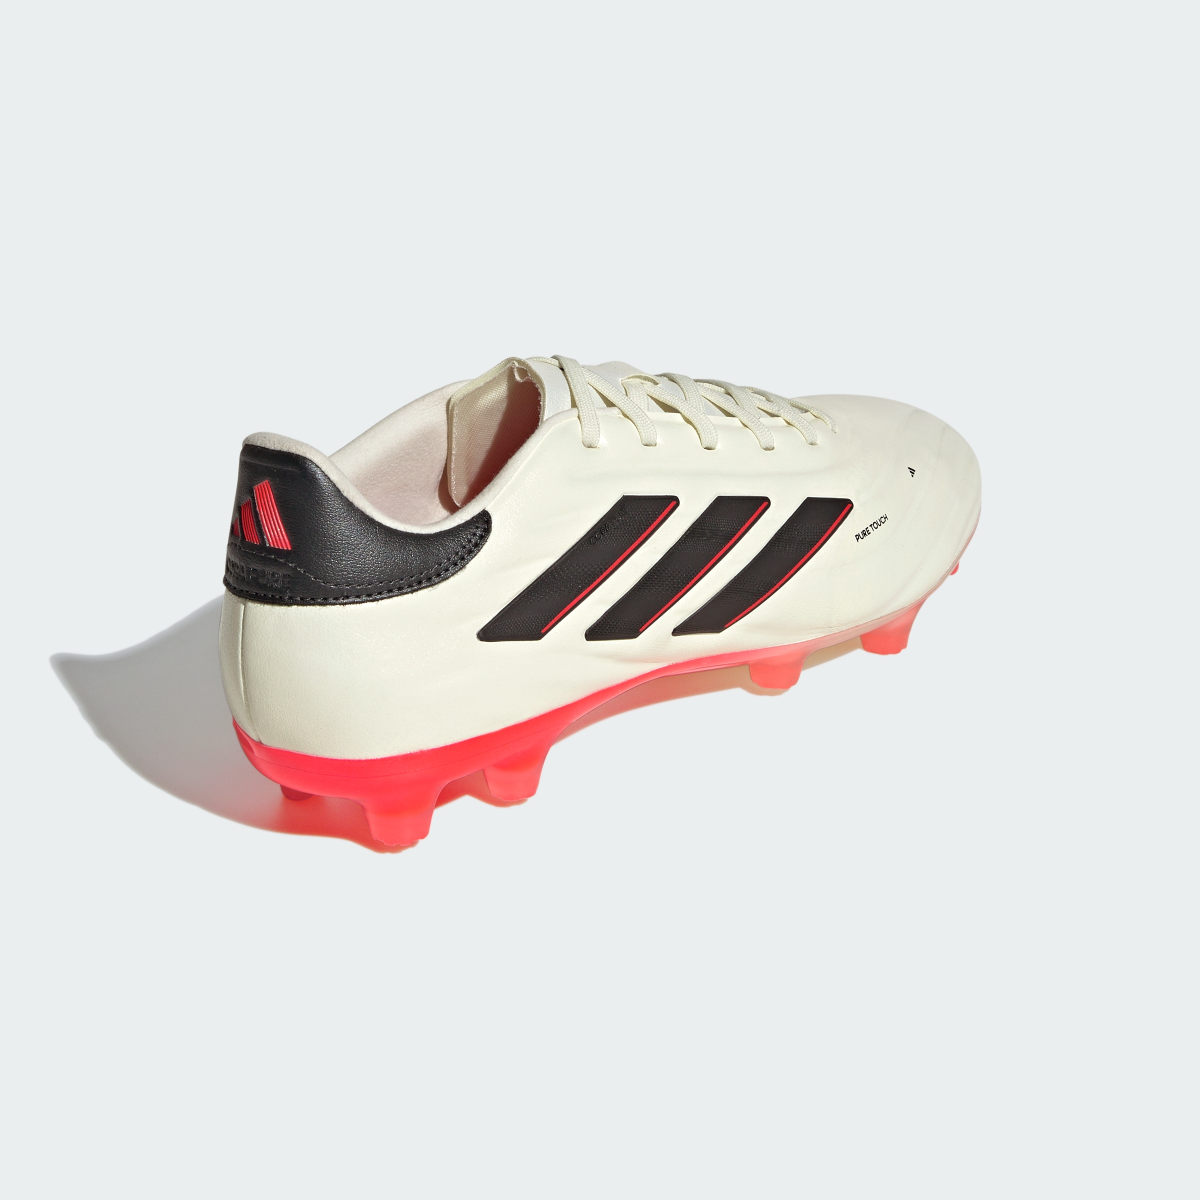 Adidas Copa Pure II Pro Firm Ground Boots. 6